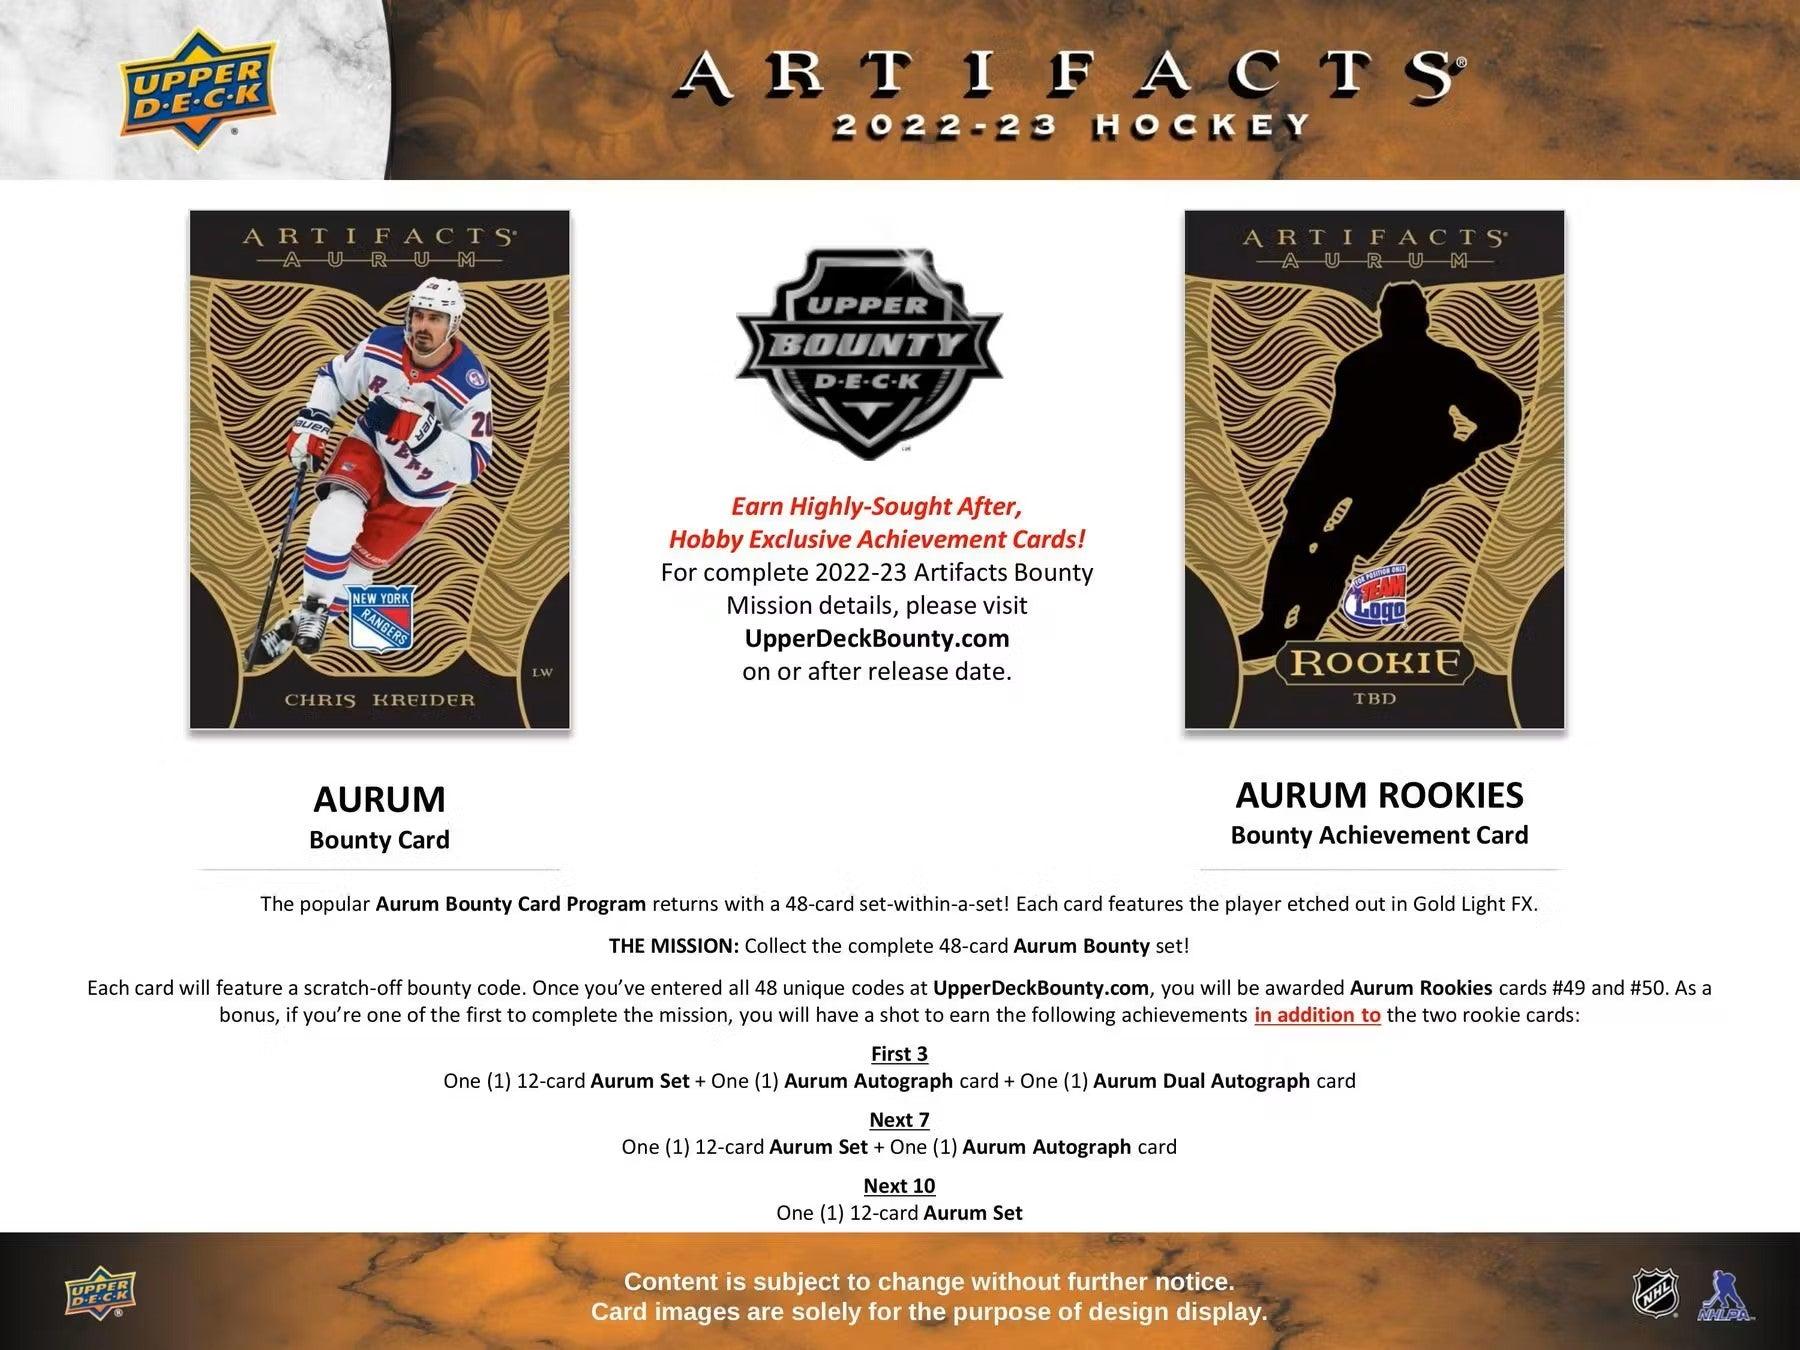 Hockey - 2022/23 - Upper Deck Artifacts - Hobby Pack (4 Cards) - Hobby Champion Inc